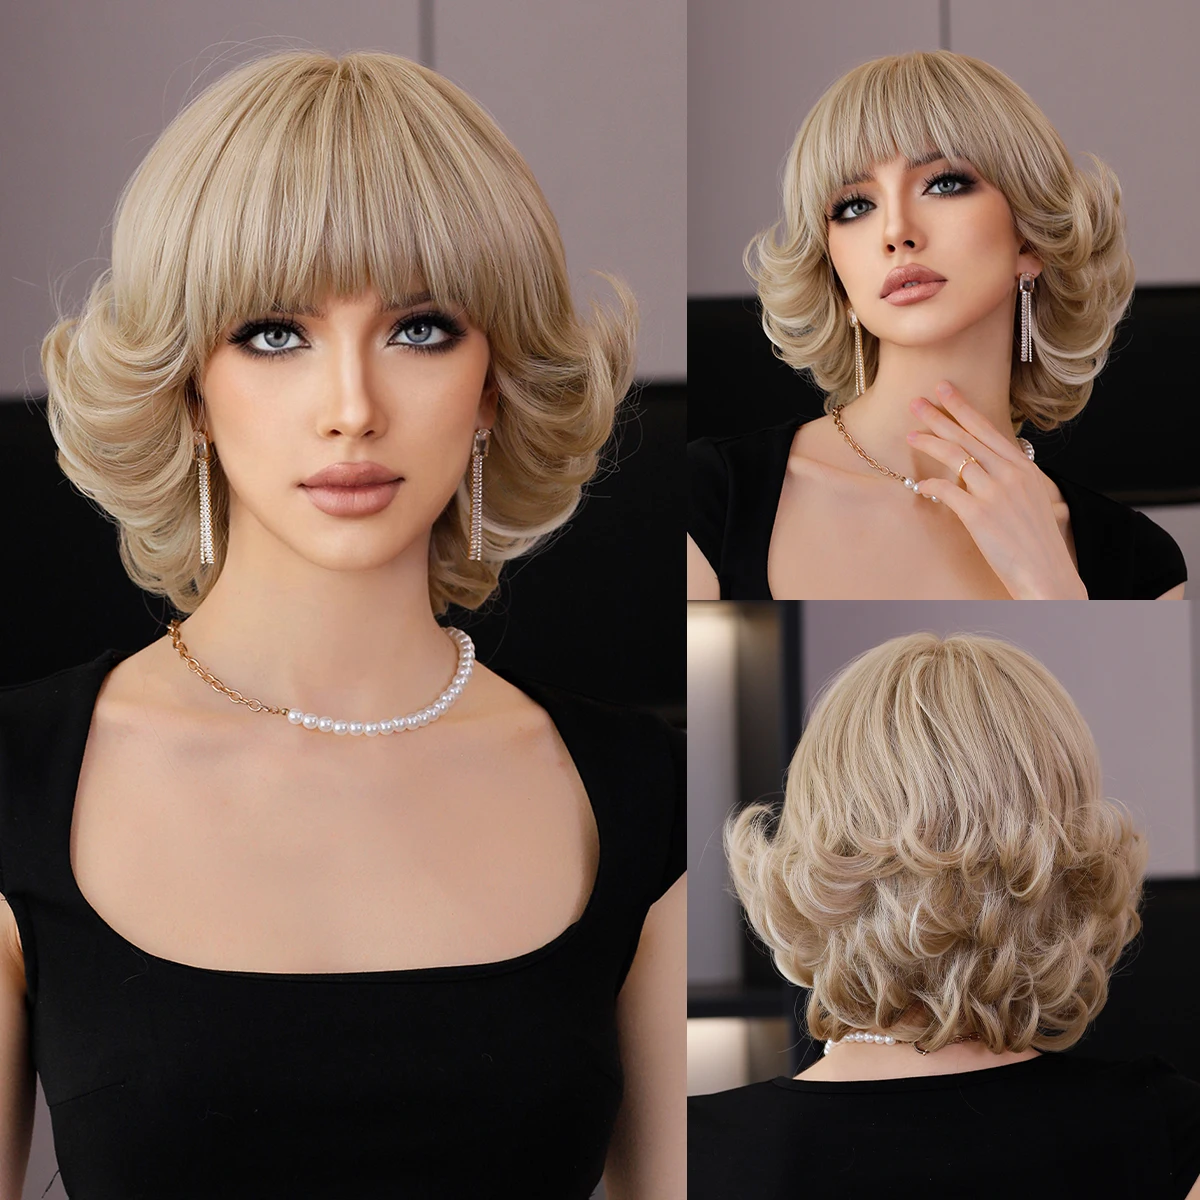 NAMM Short Silvery Blonde Retro Bob Wig with Bangs for Women Daily Party Synthetic Straight Light Blonde Wigs Heat Resistant 2 4g wireless dmx512 receiver holdlamp led lighting controller for stage light theaters theme parks dance halls bars silvery